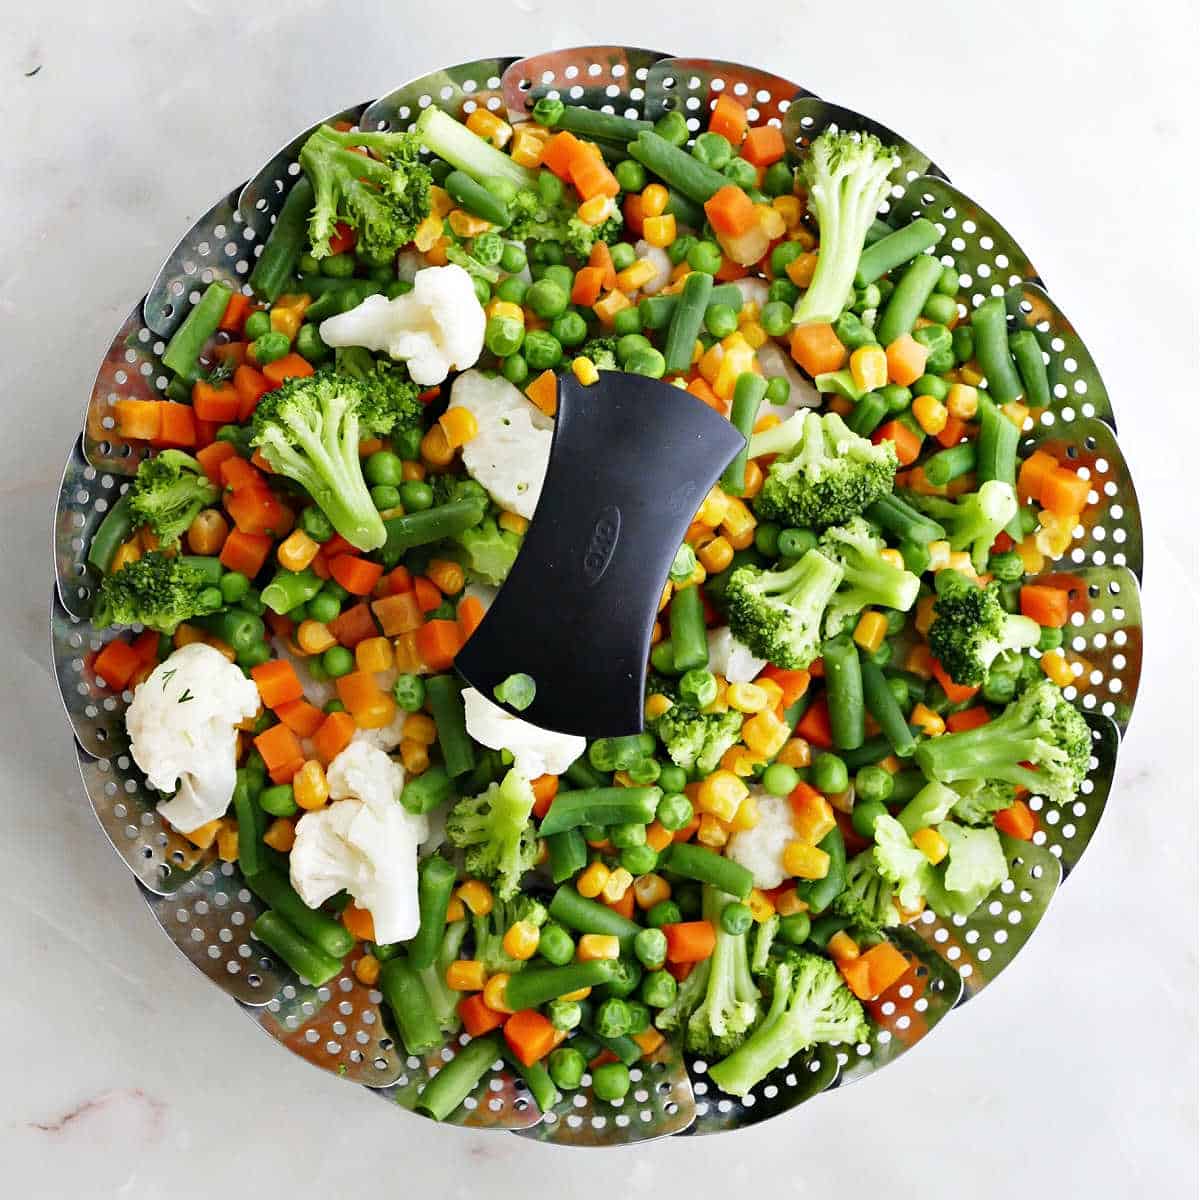 What To Do With Frozen Vegetables